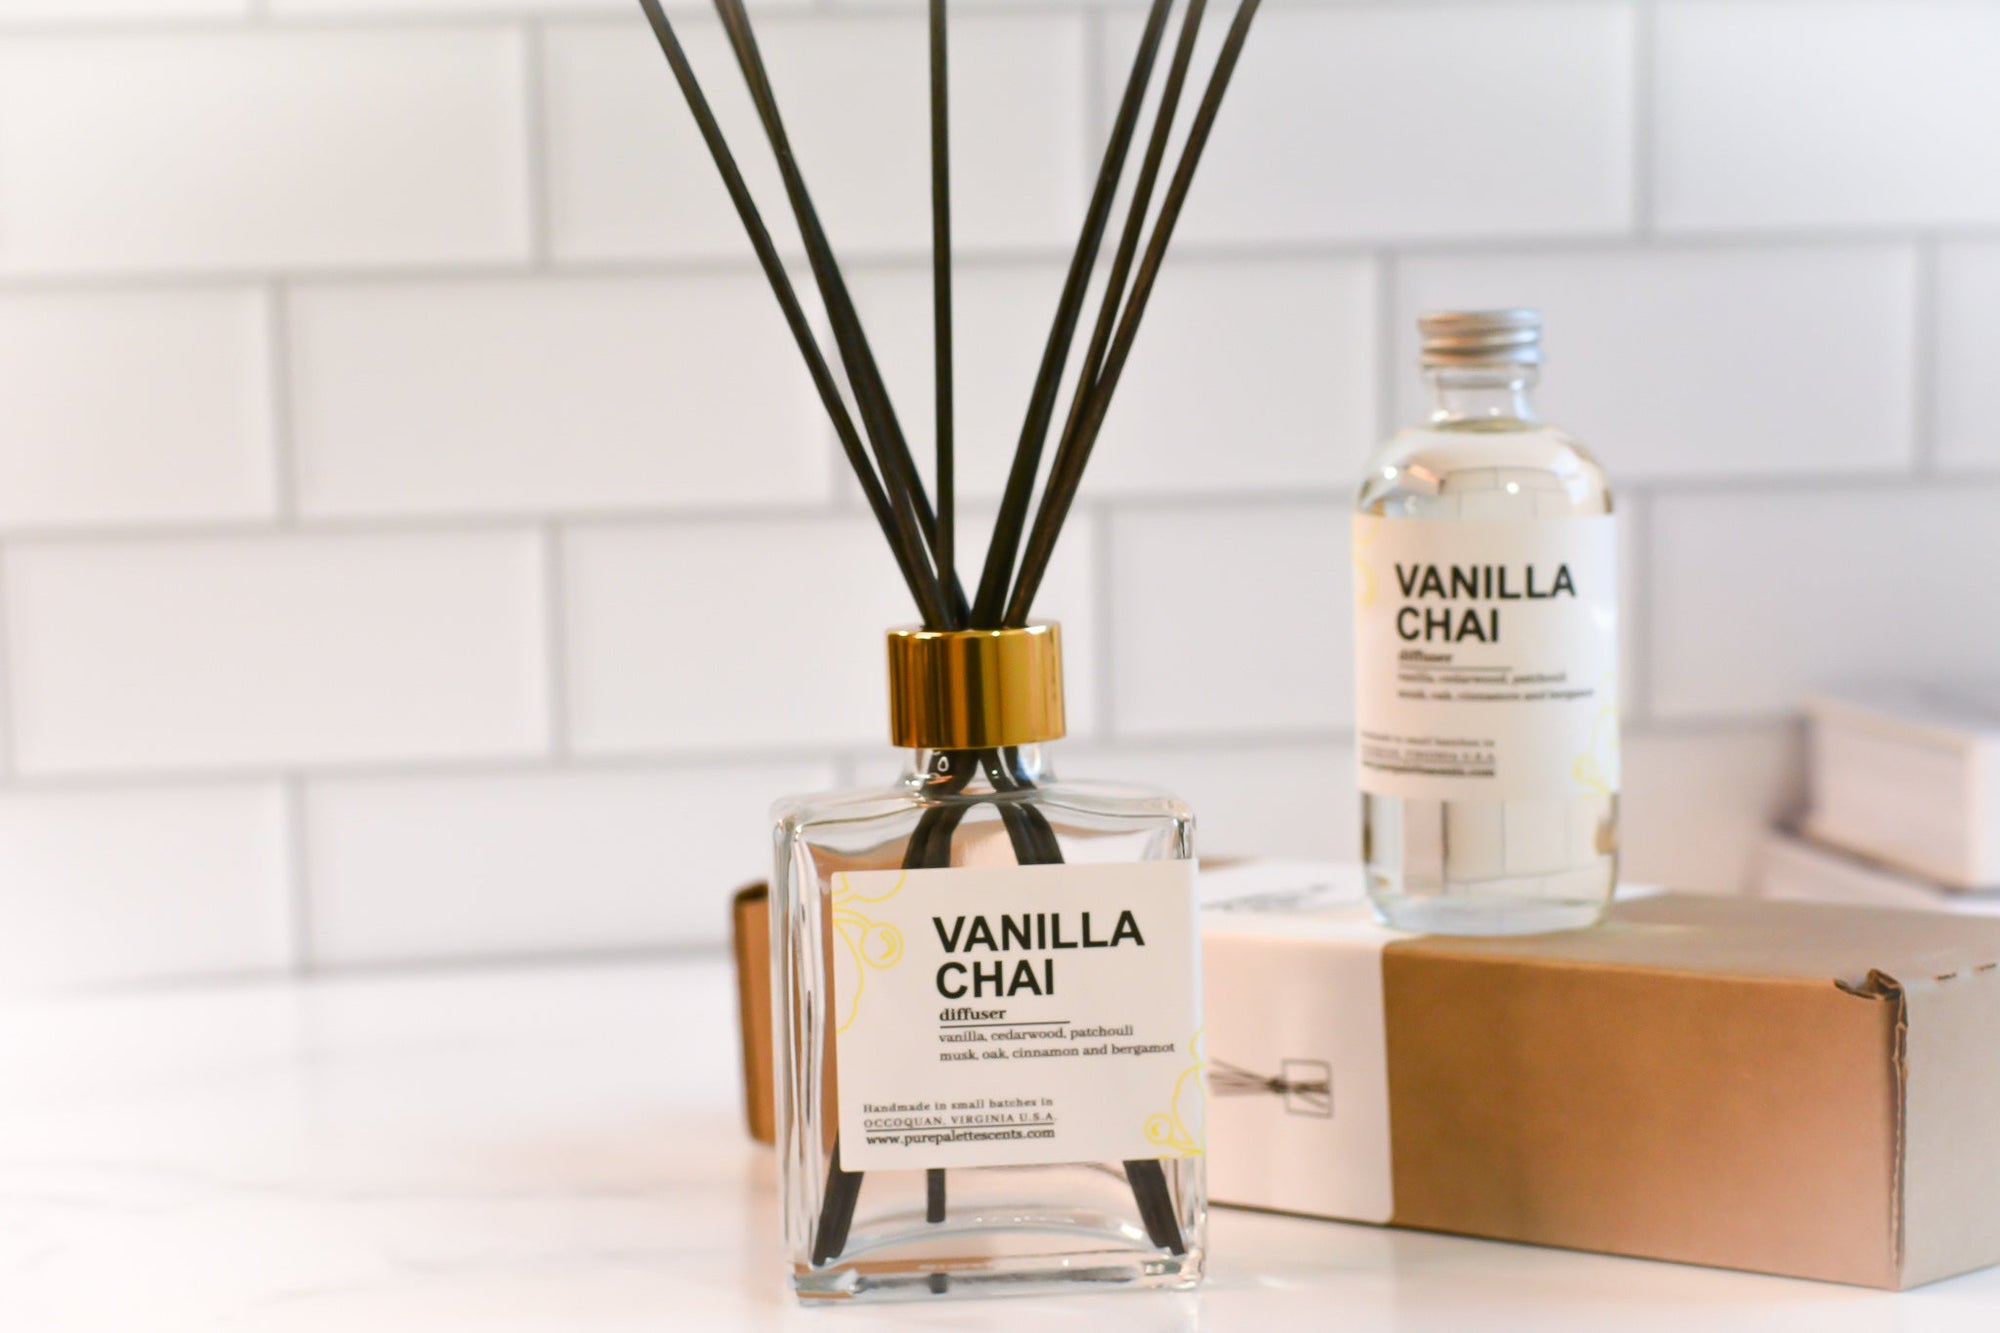 COCONUT & VANILLA Strong Scented Diffuser Aroma Reeds BEDROOM & SPA  FRAGRANCES